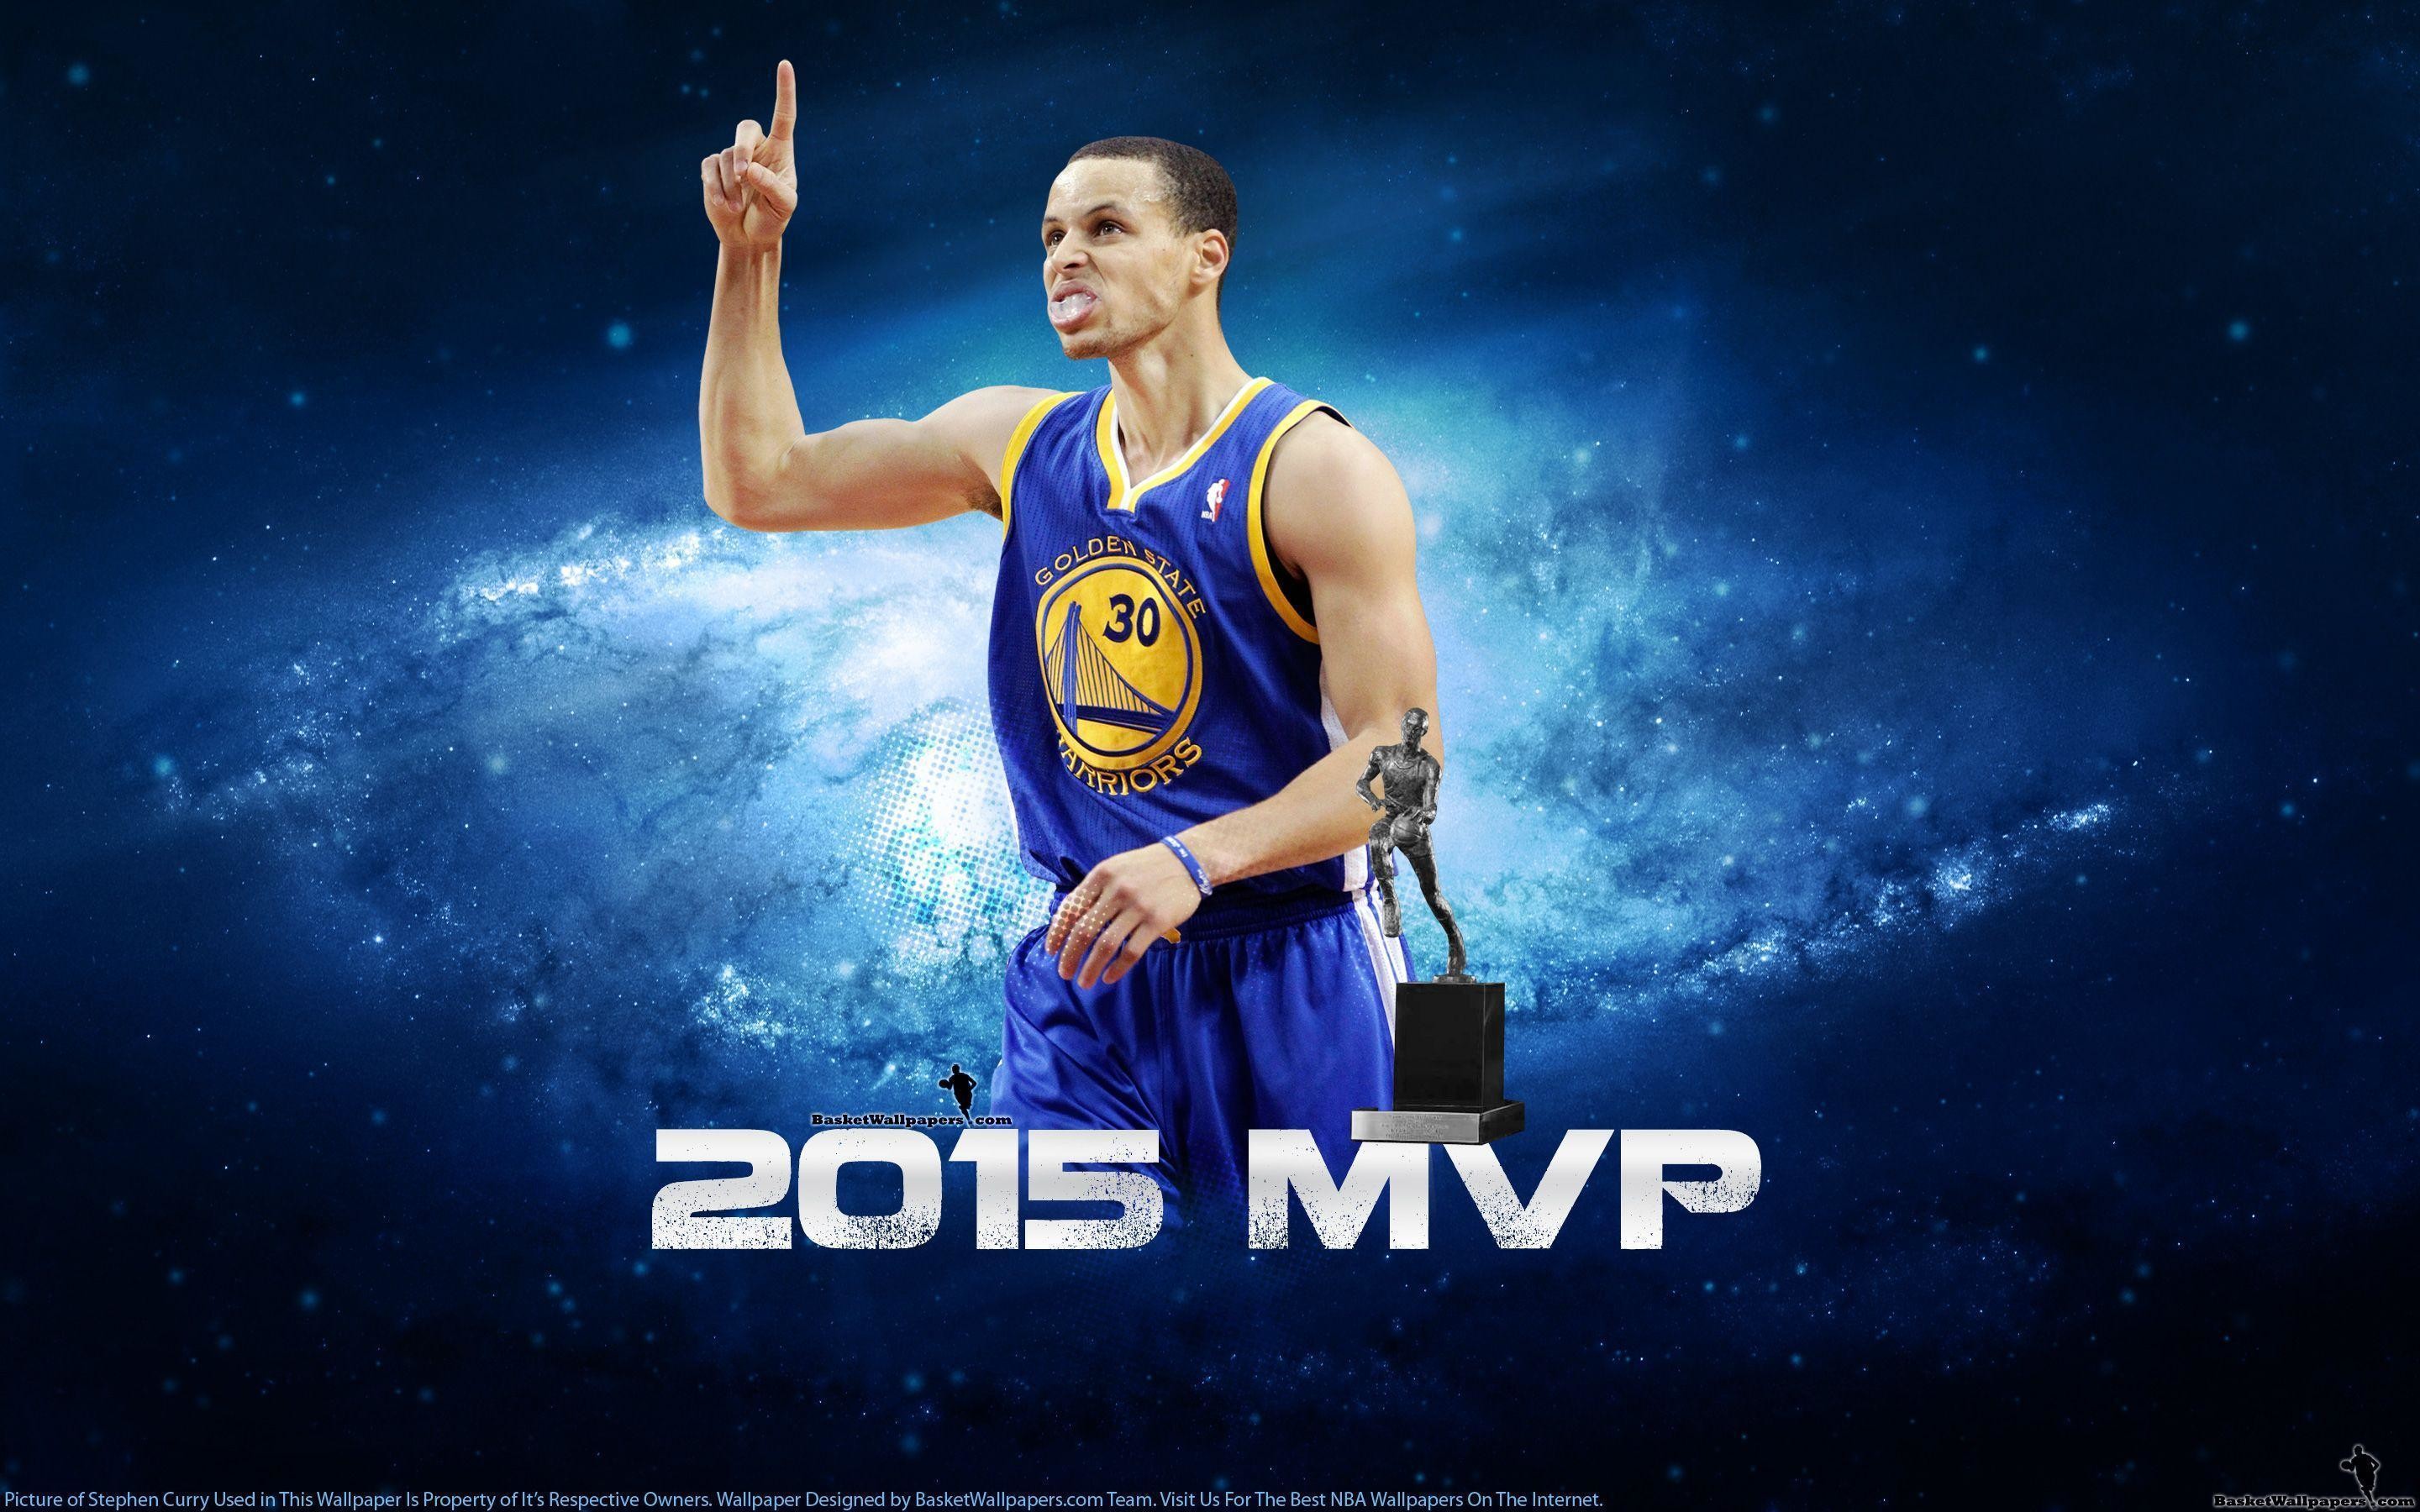 2880x1800 Stephen Curry Wallpapers | Basketball Wallpapers at .